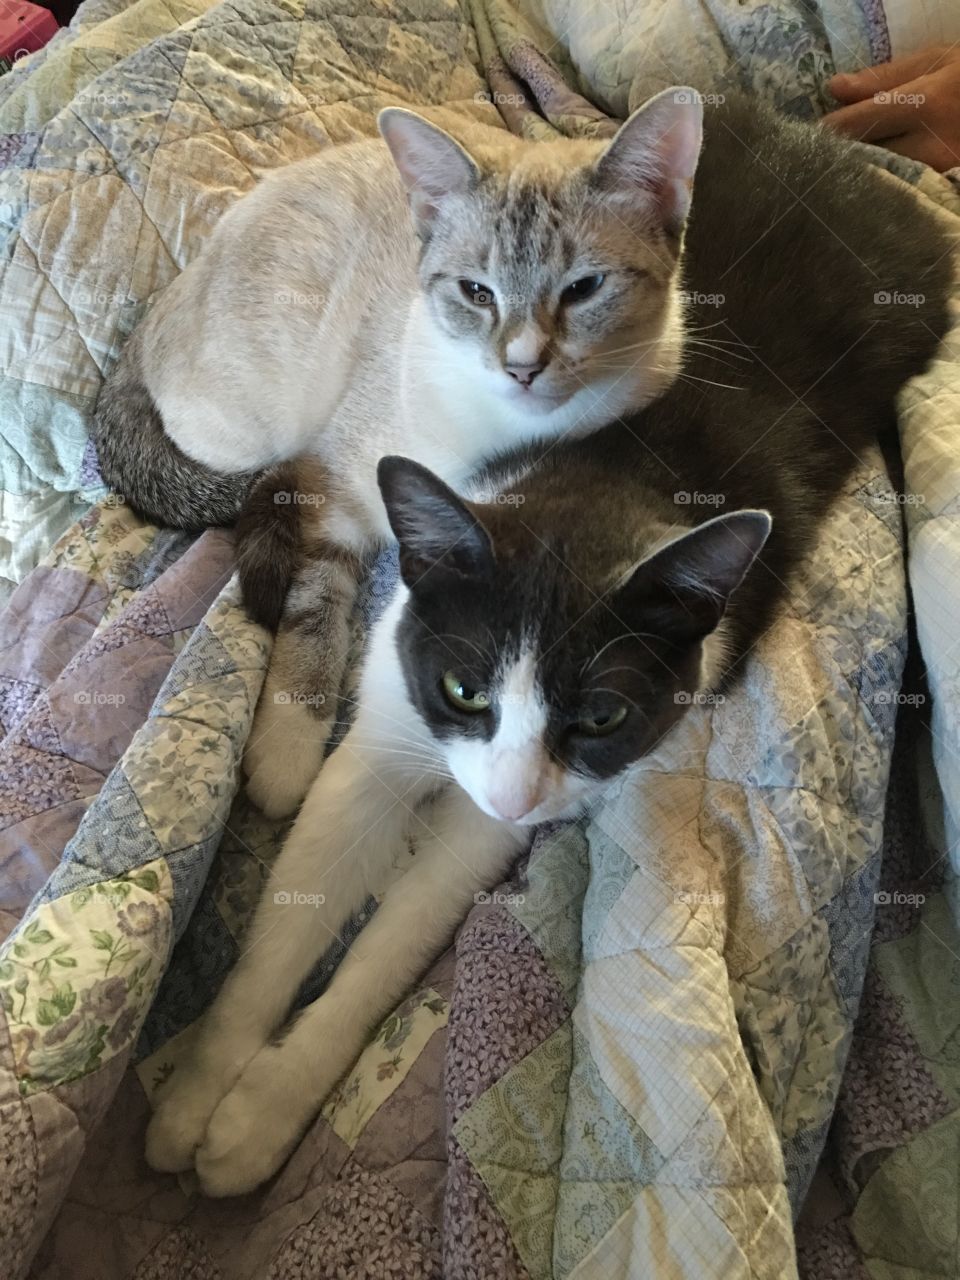 These two didn't always see eye to eye, but now they are inseparable 